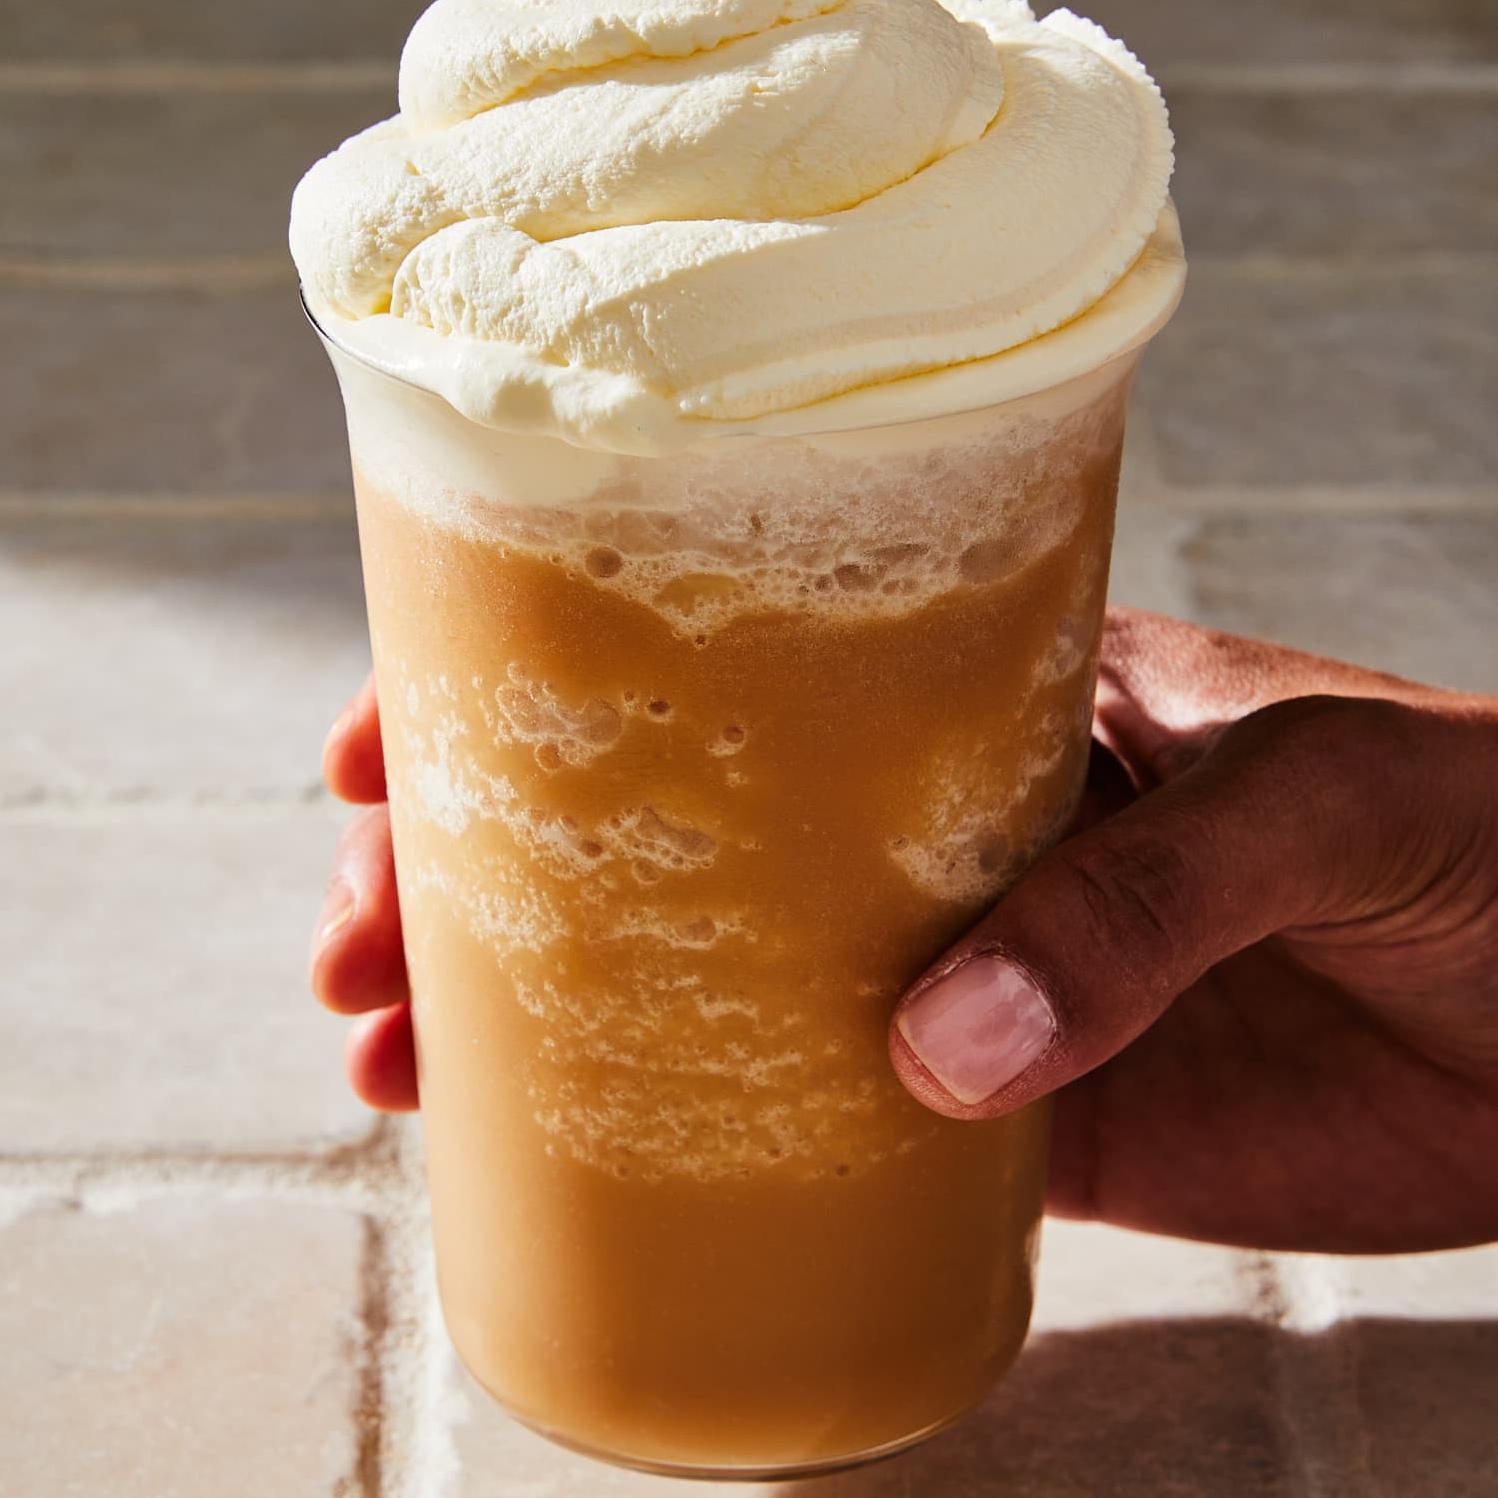  Cool off with this iced drink.